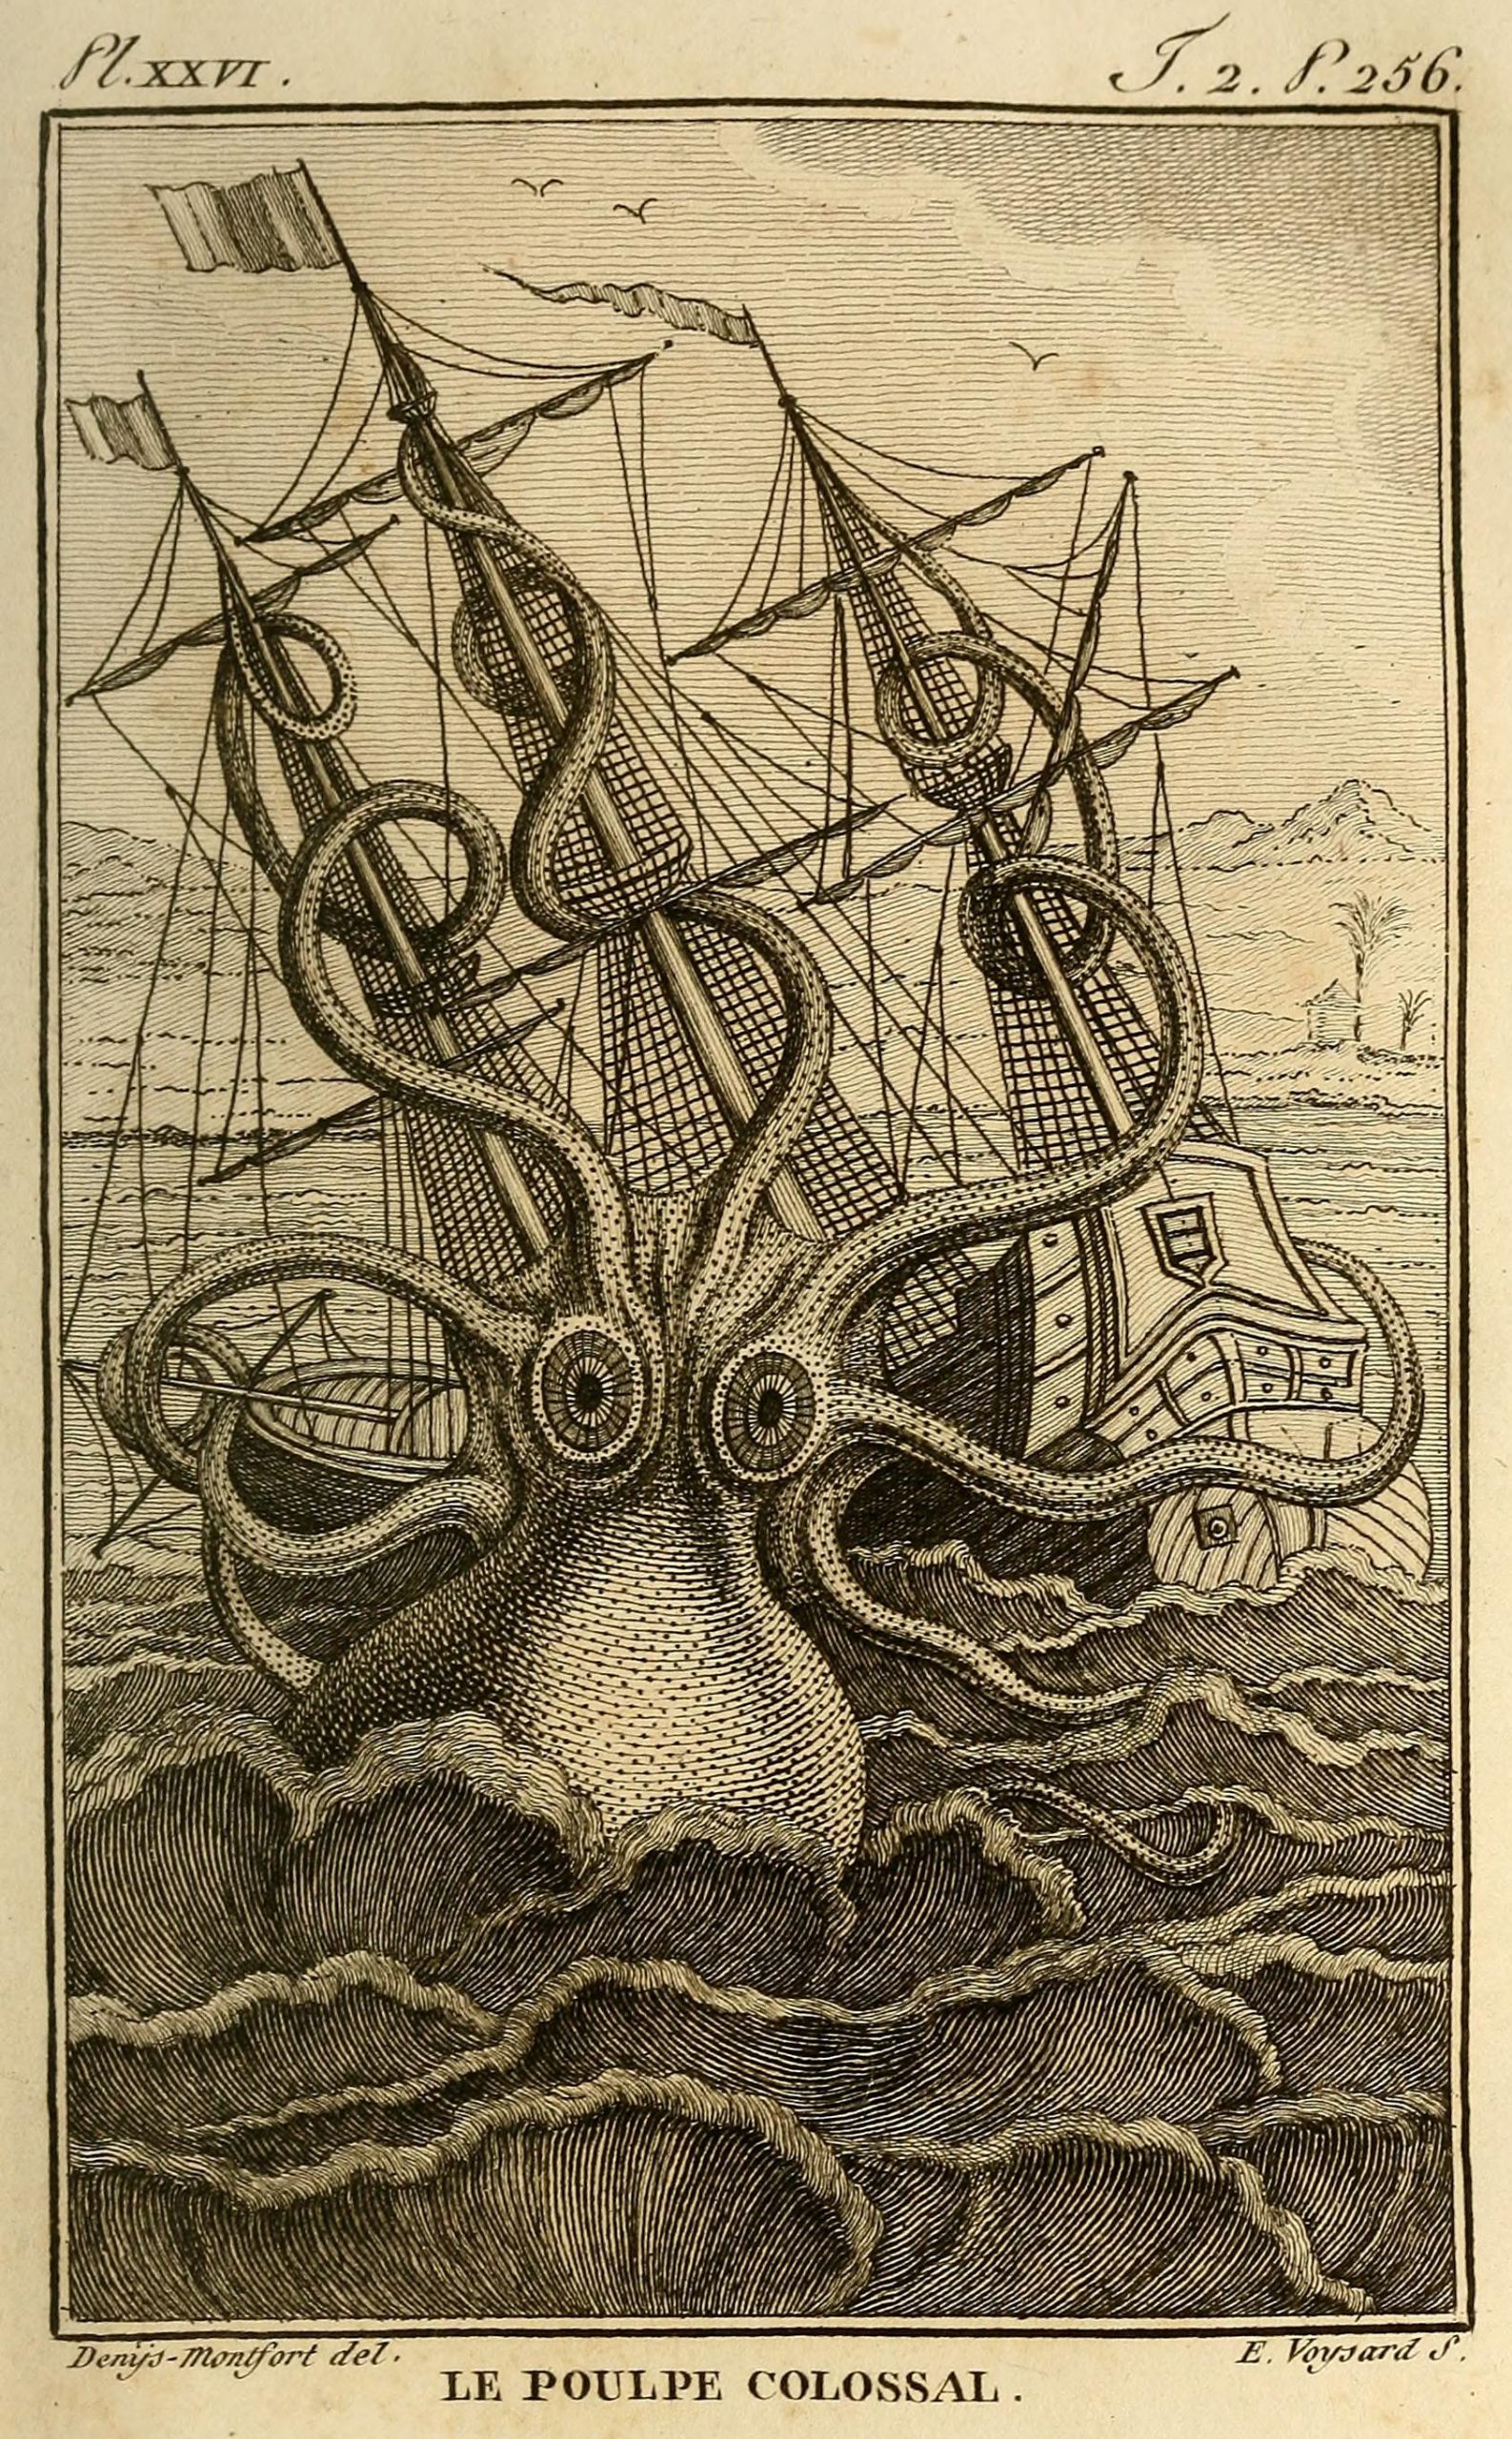 A giant octopus in the ocean attacking a ship with its tentacles